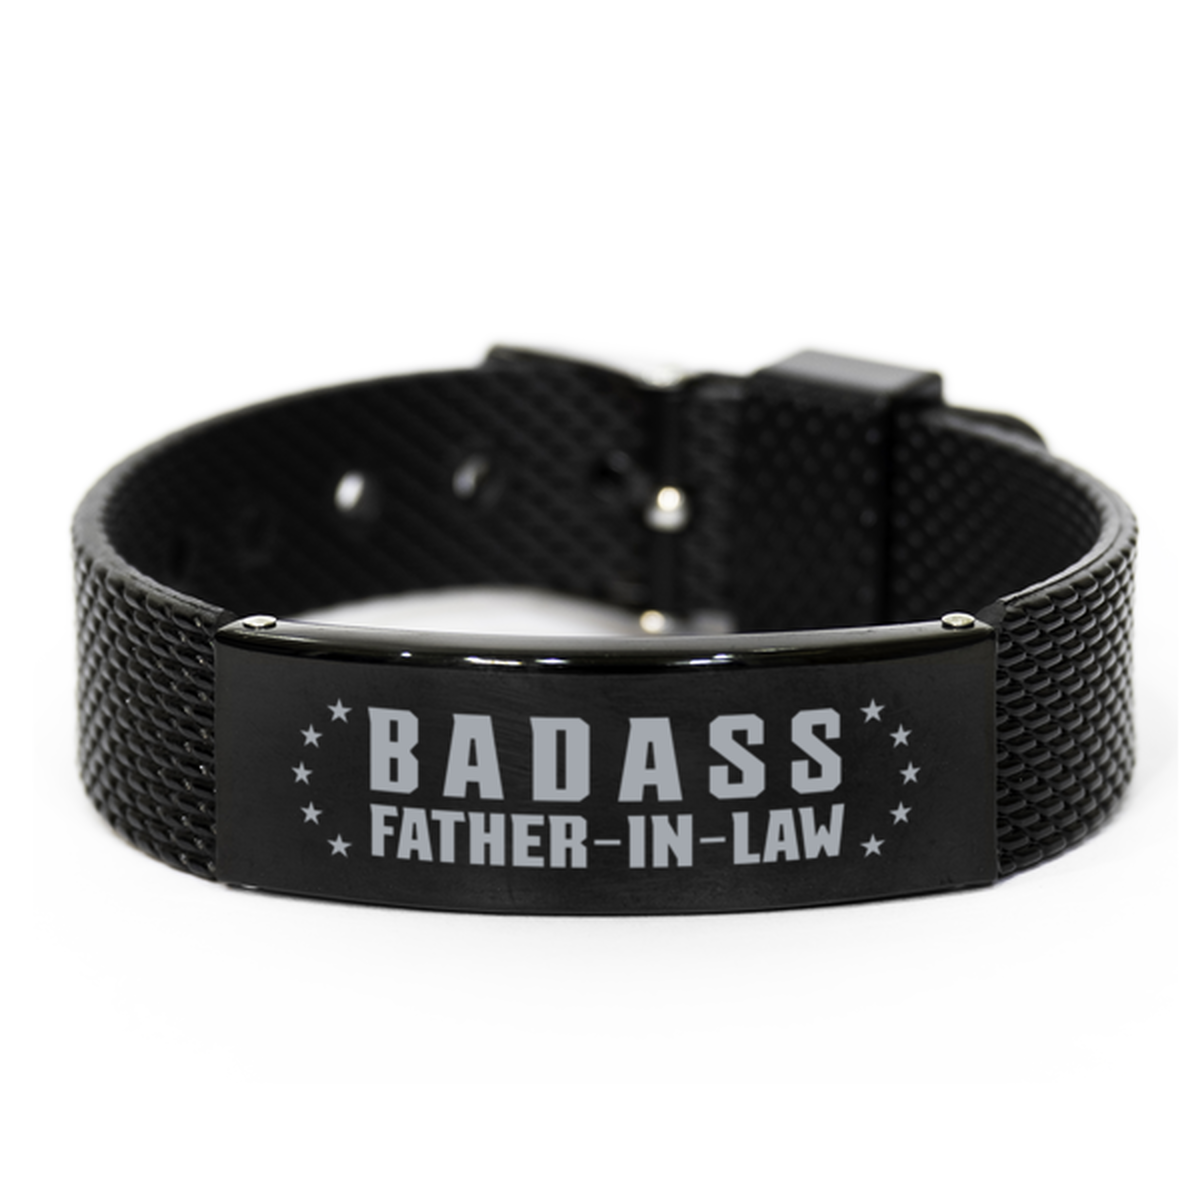 Father-in-law Black Shark Mesh Bracelet, Badass Father-in-law, Funny Family Gifts For Father-in-law From Son Daughter